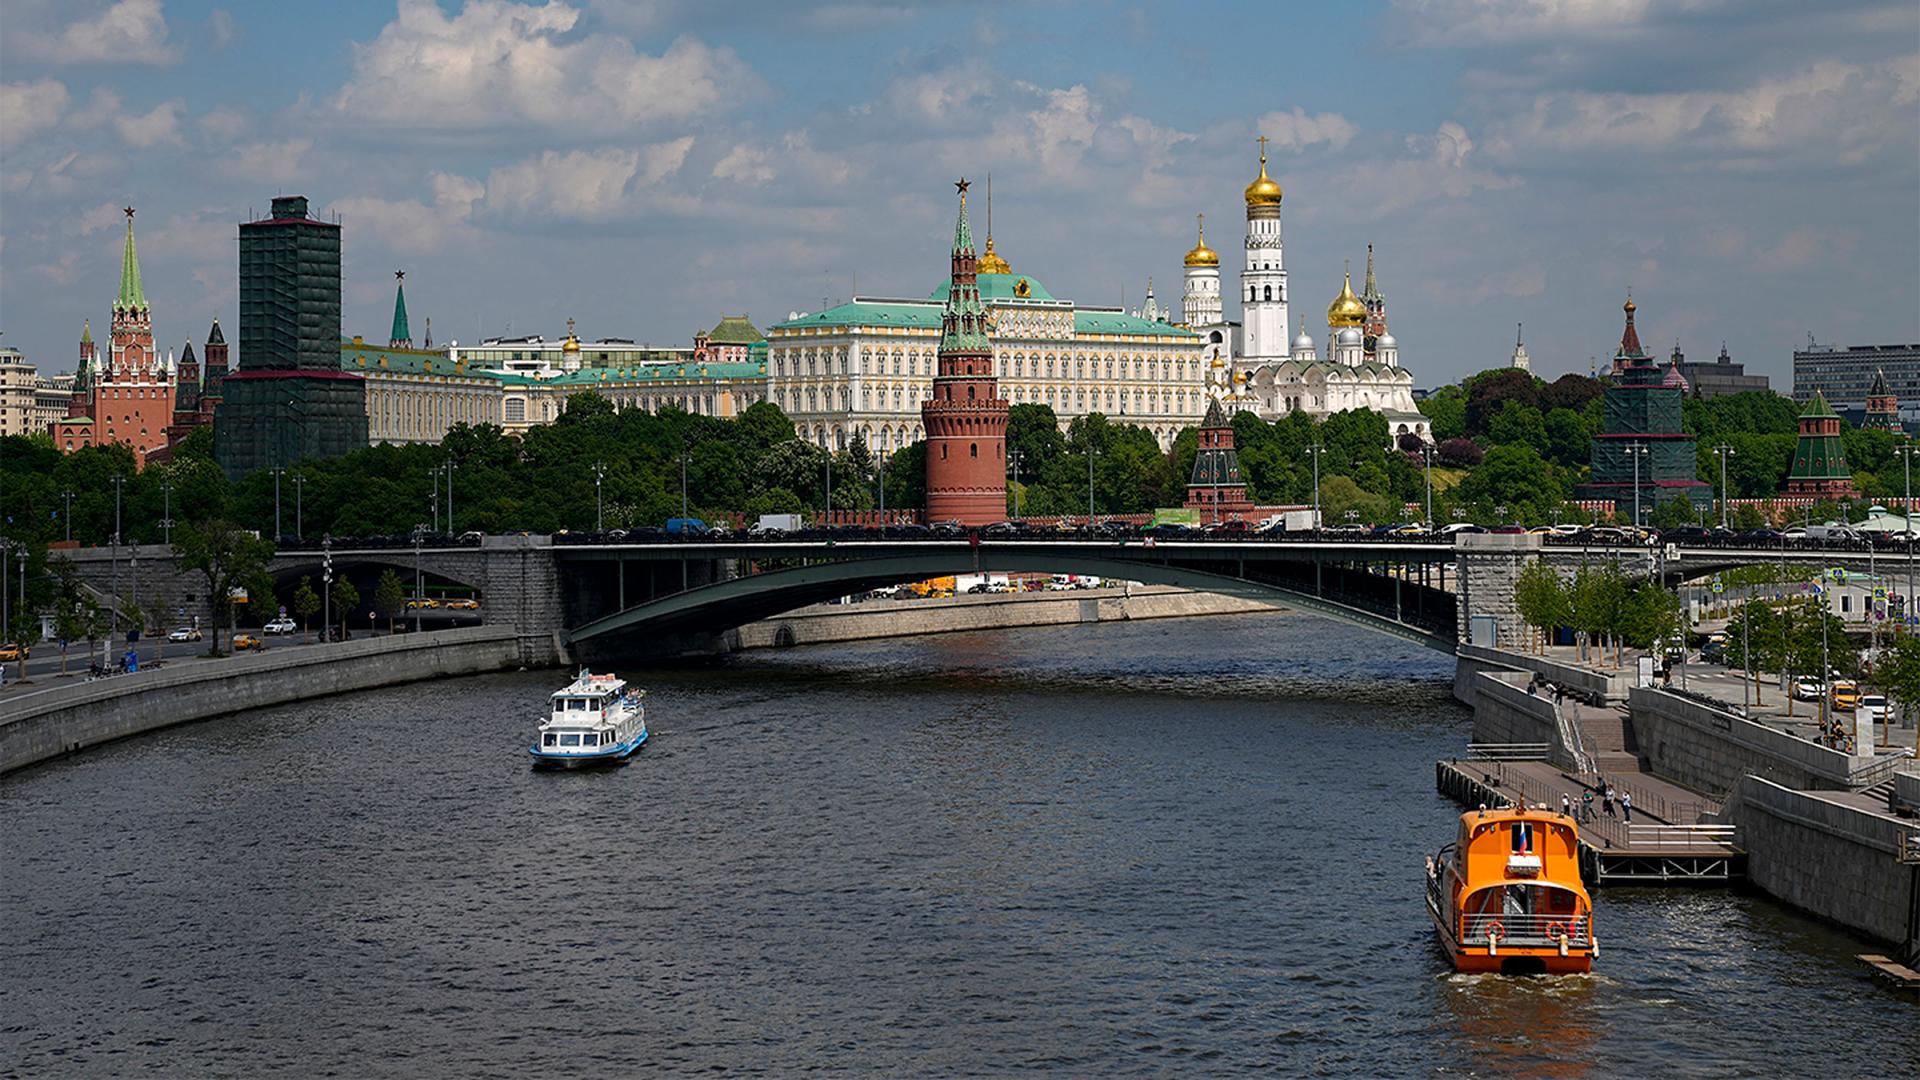 A view of the Big Kremlin Palace and Churches with the Moskva River in Moscow, Russia